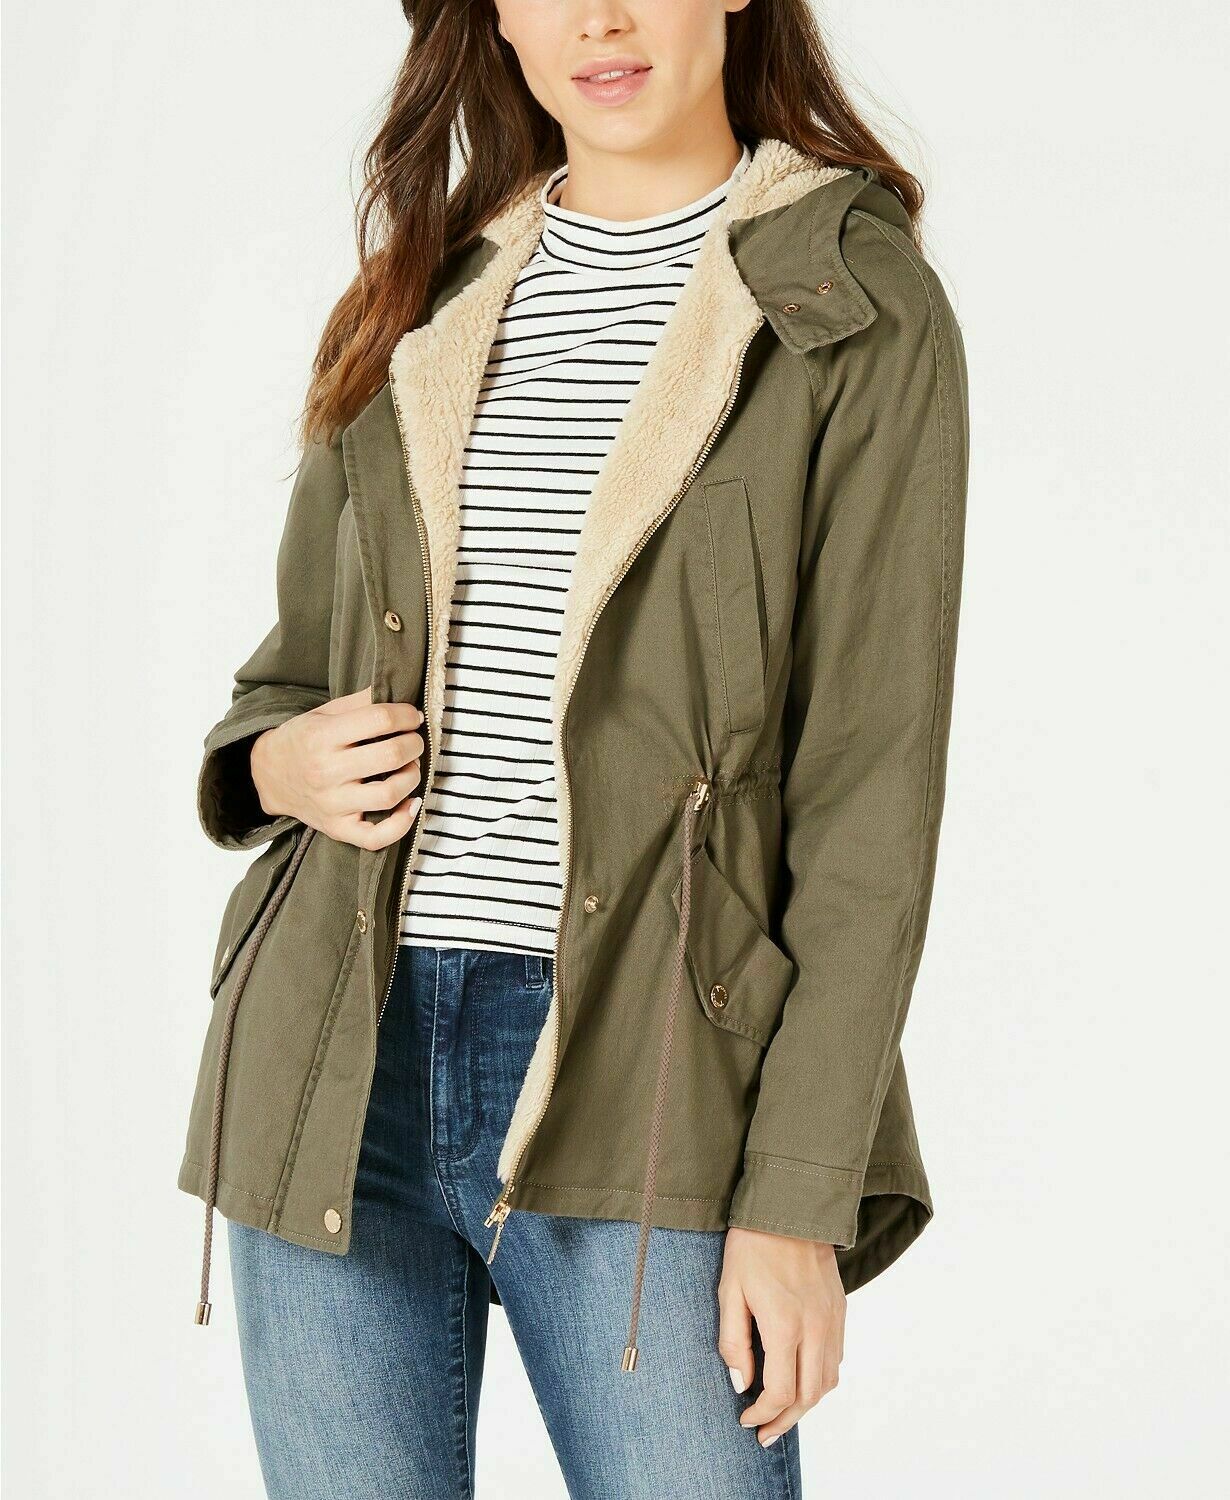 Collection B, Juniors' Hooded Anorak Jacket , ROSEMARY, XS - image 1 of 3